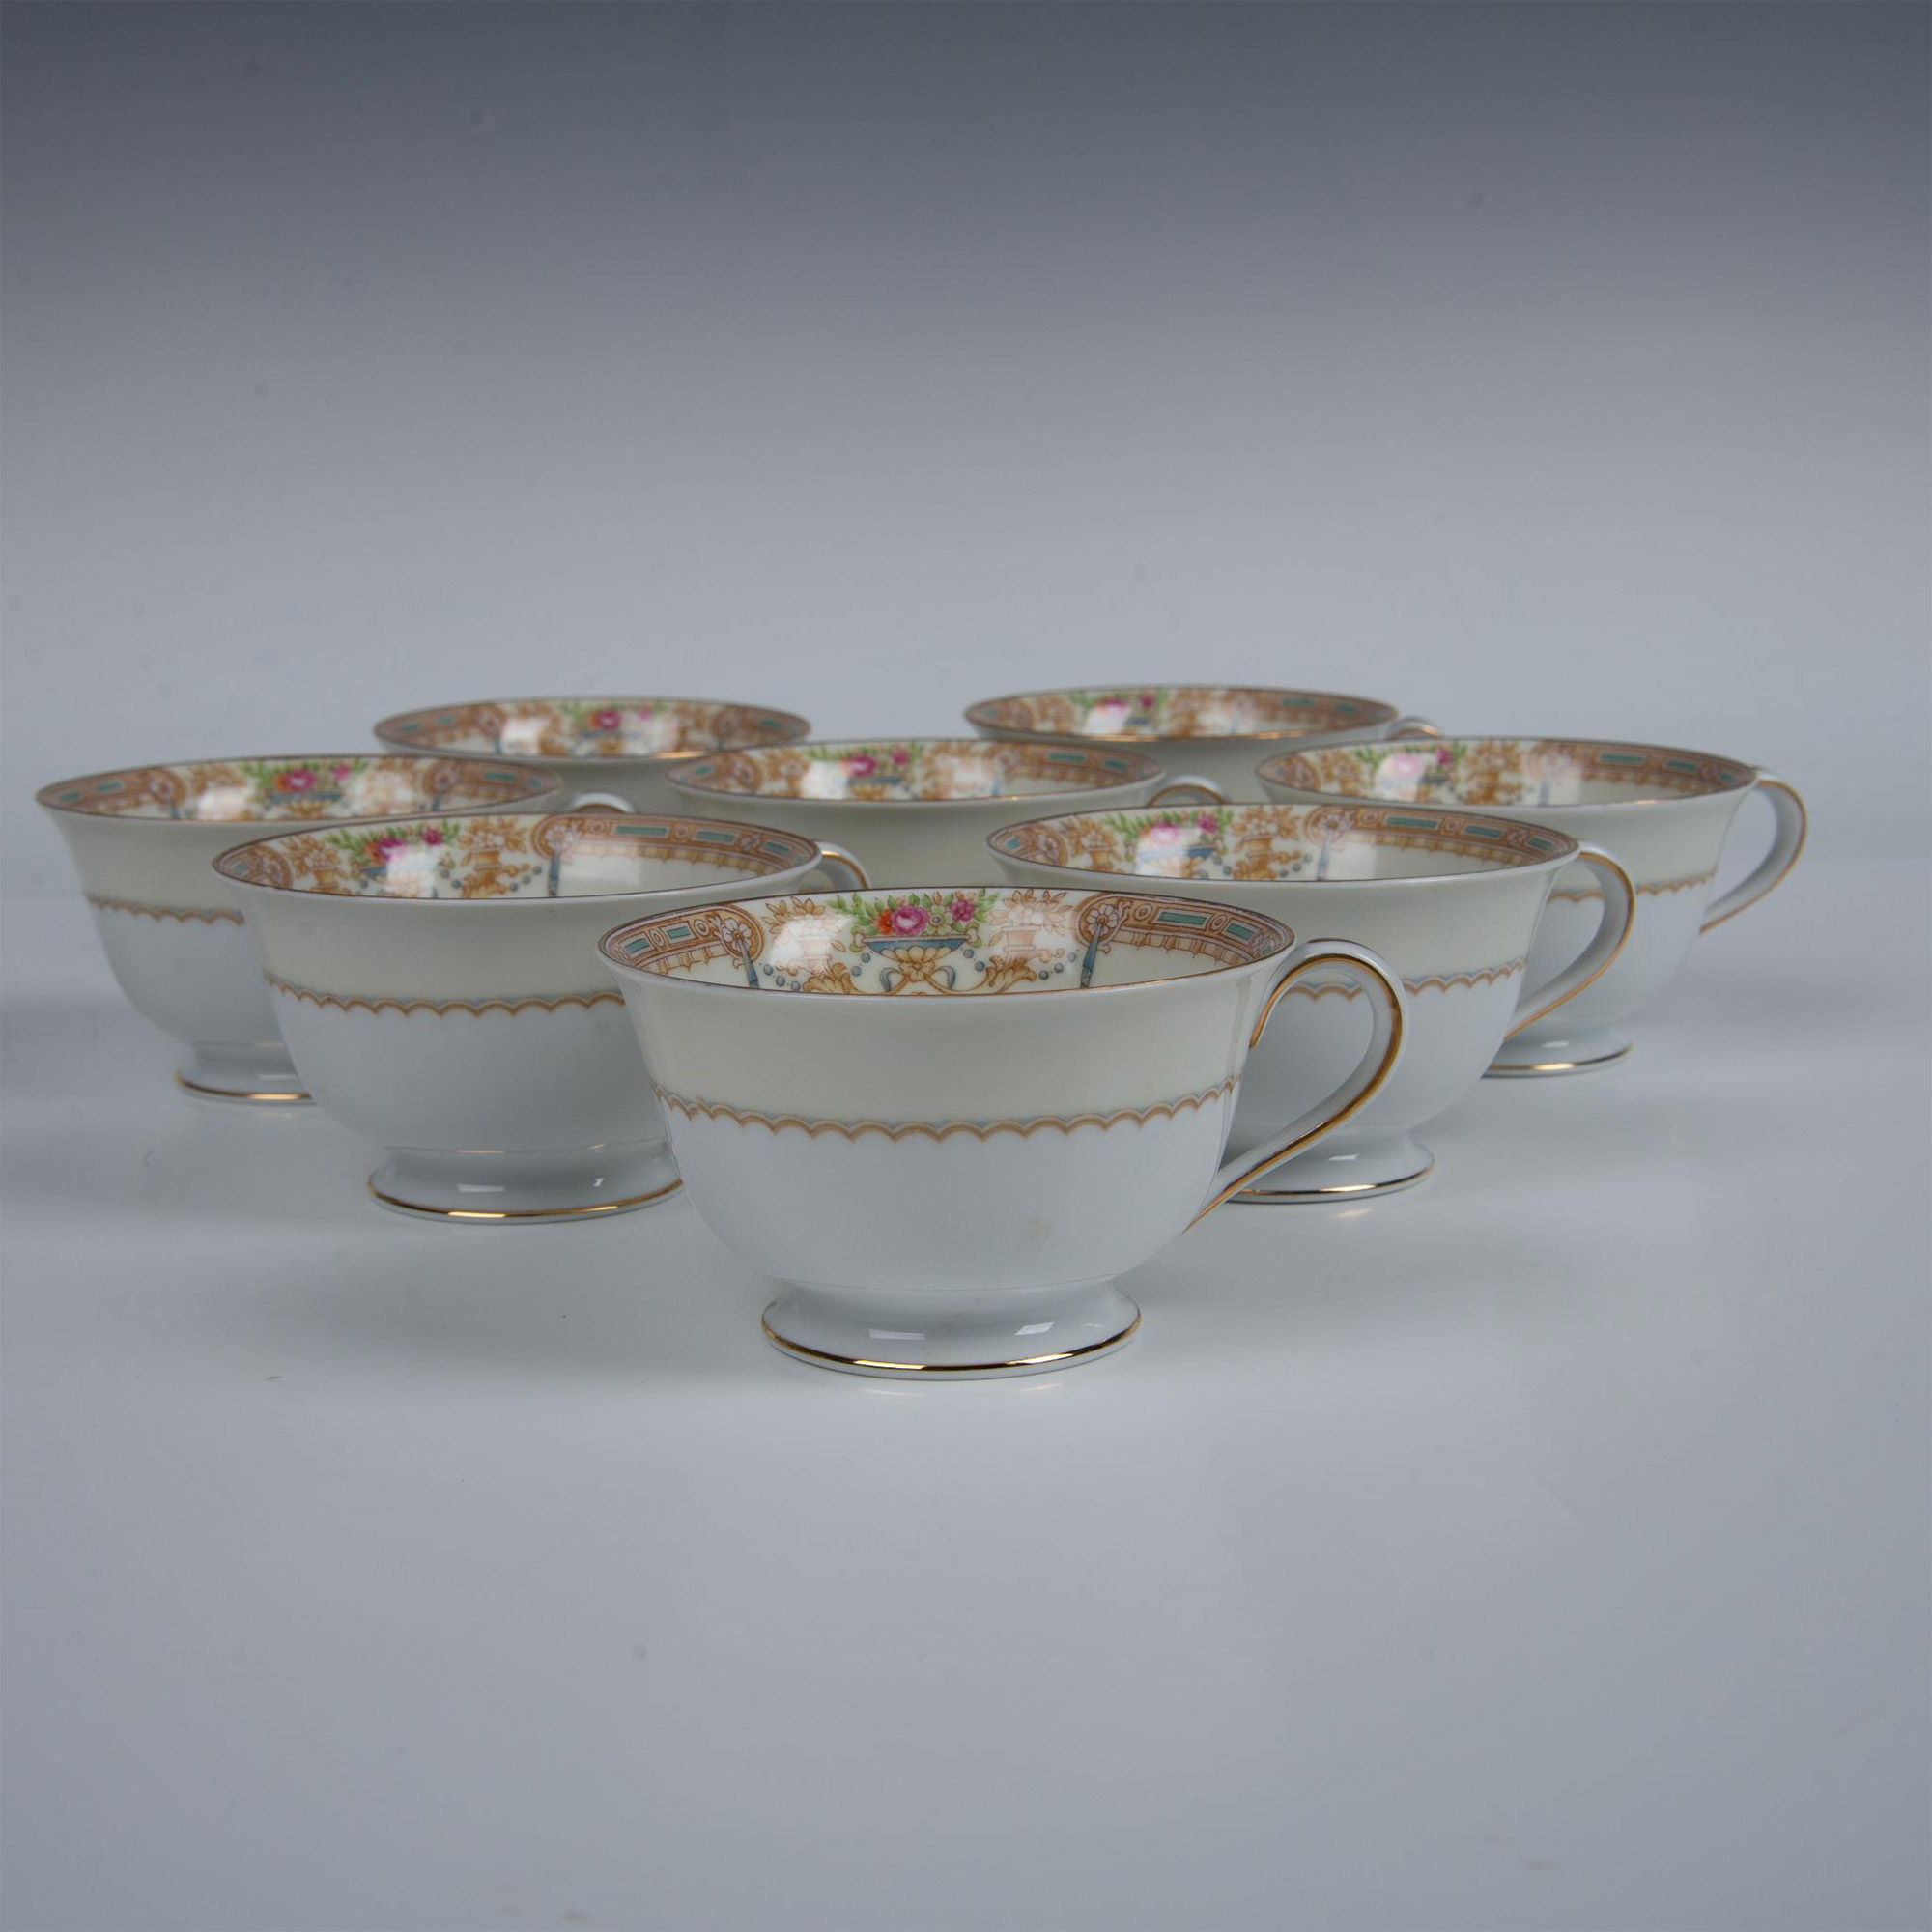 55 pc Vintage Noritake China Dinner Service for 8, Sonora - Image 8 of 11